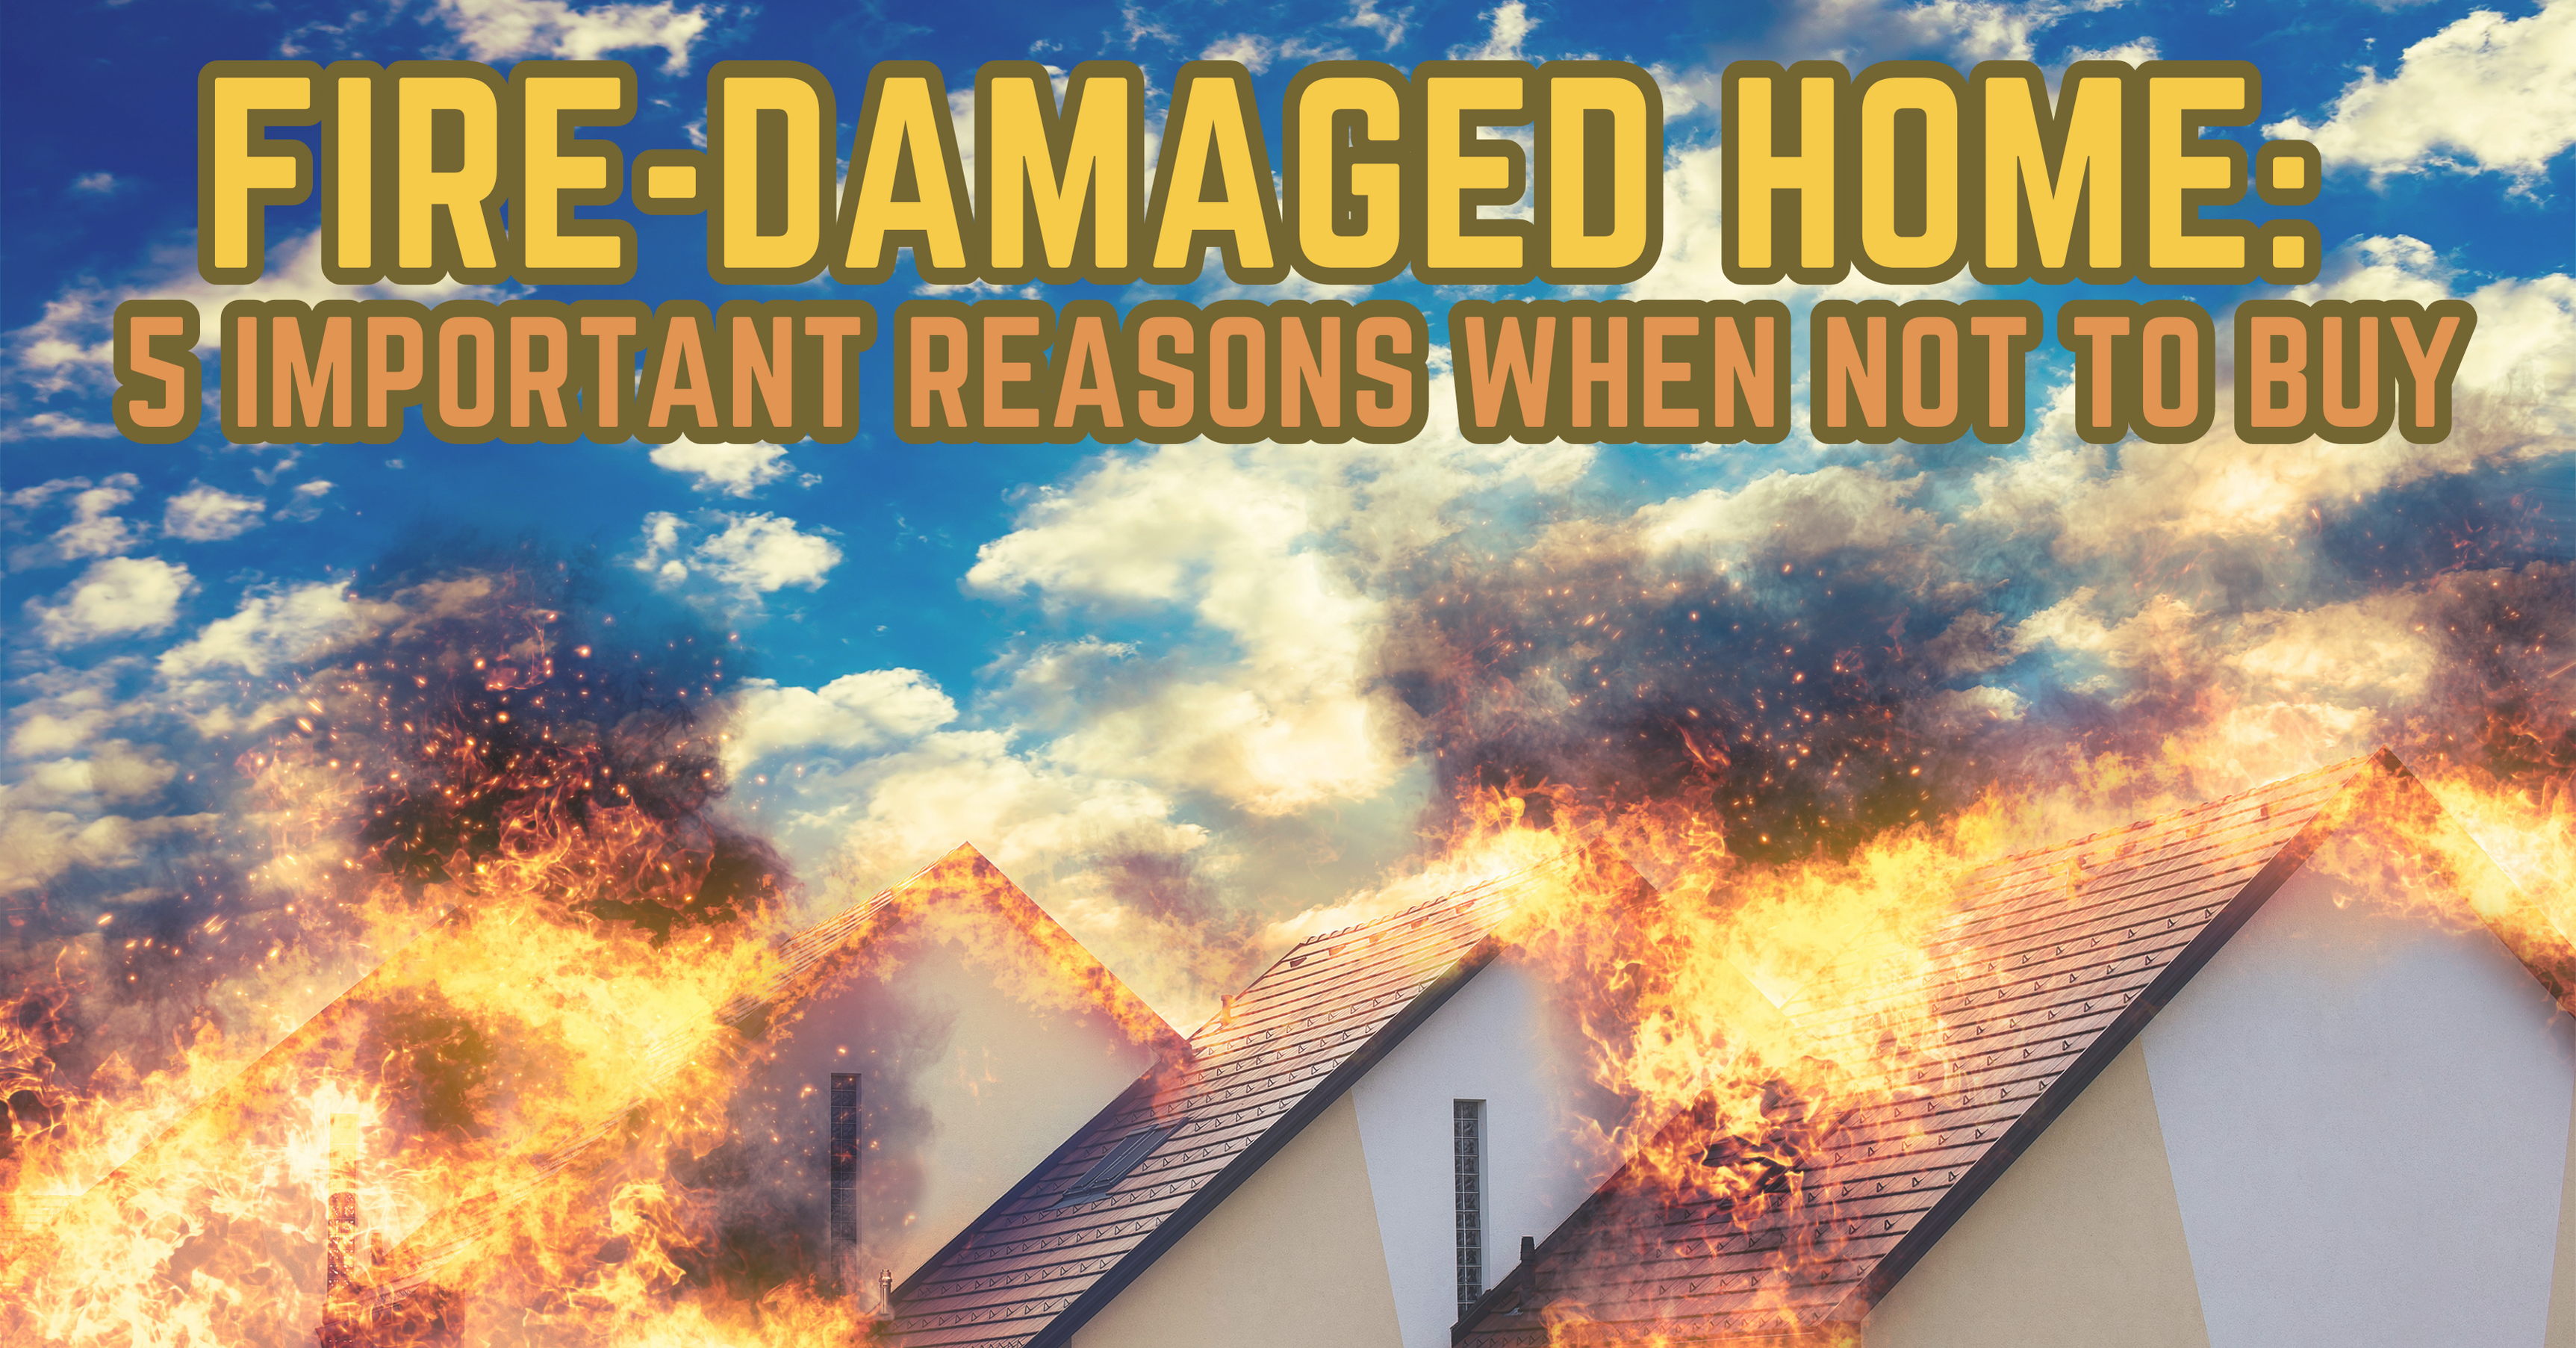 fire-damaged homes: 5 important reasons when not yo buy